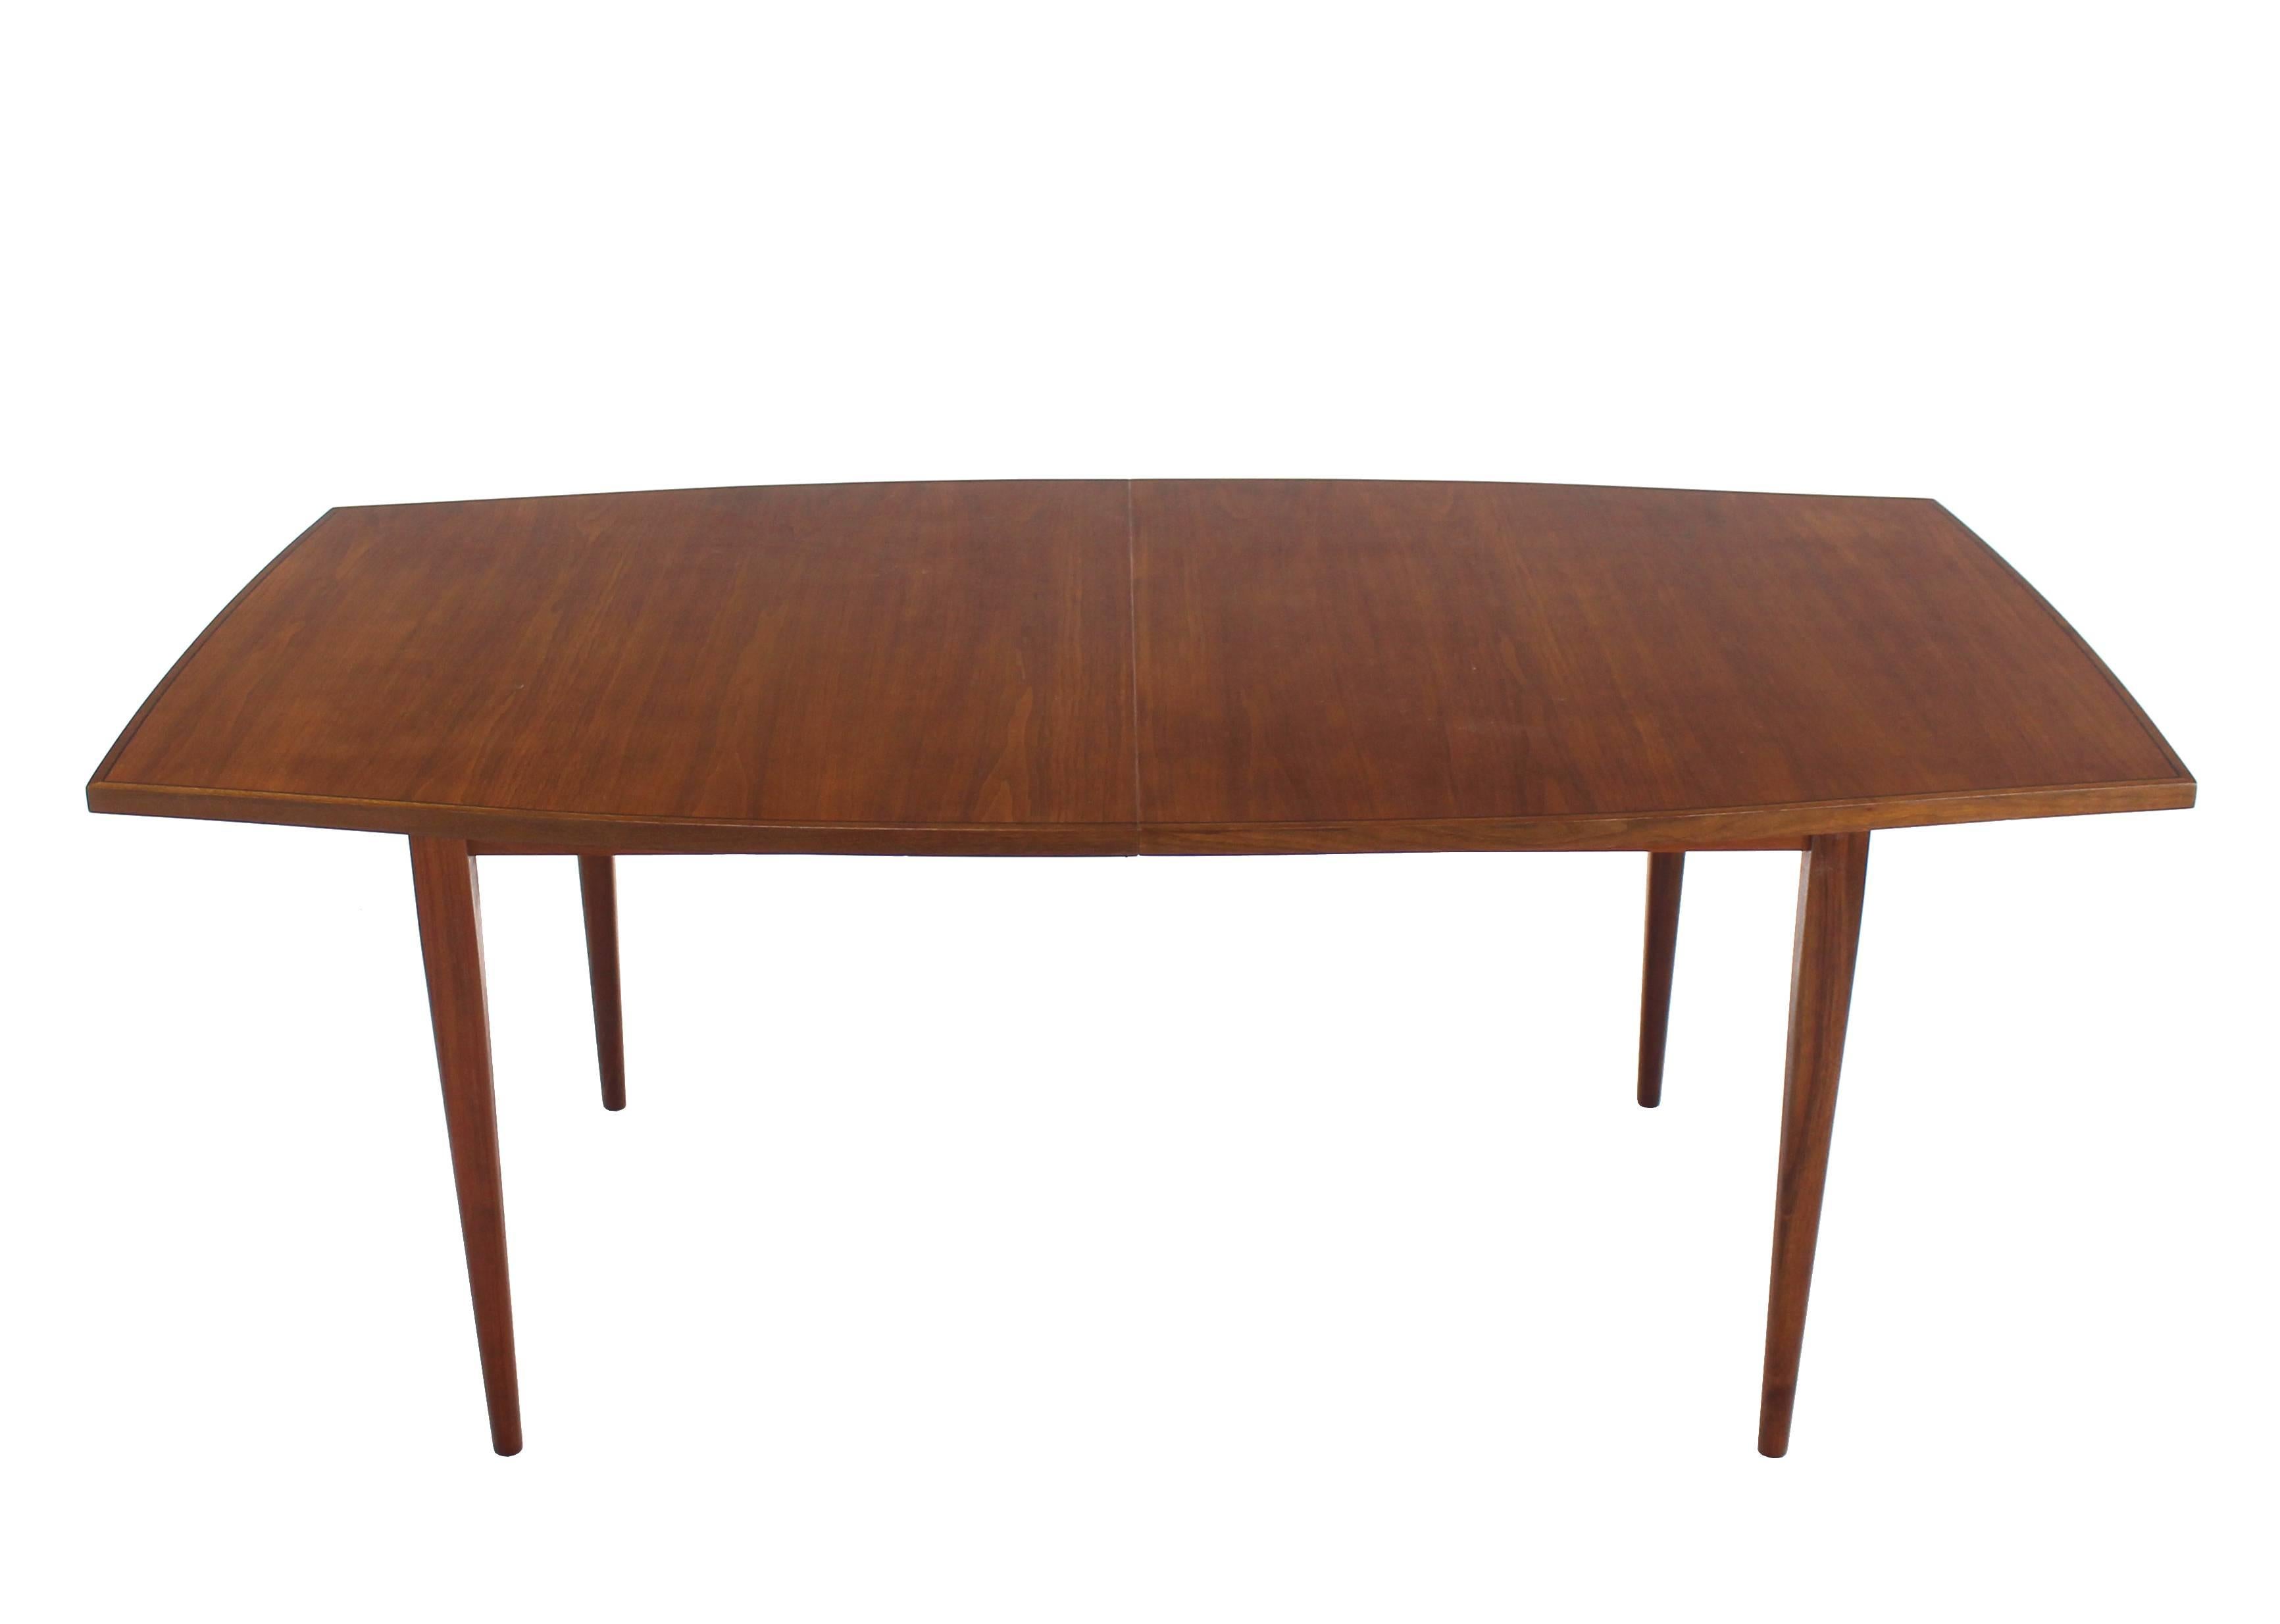 Very nice Mid-Century Modern walnut dining table by direction with 3 x 21